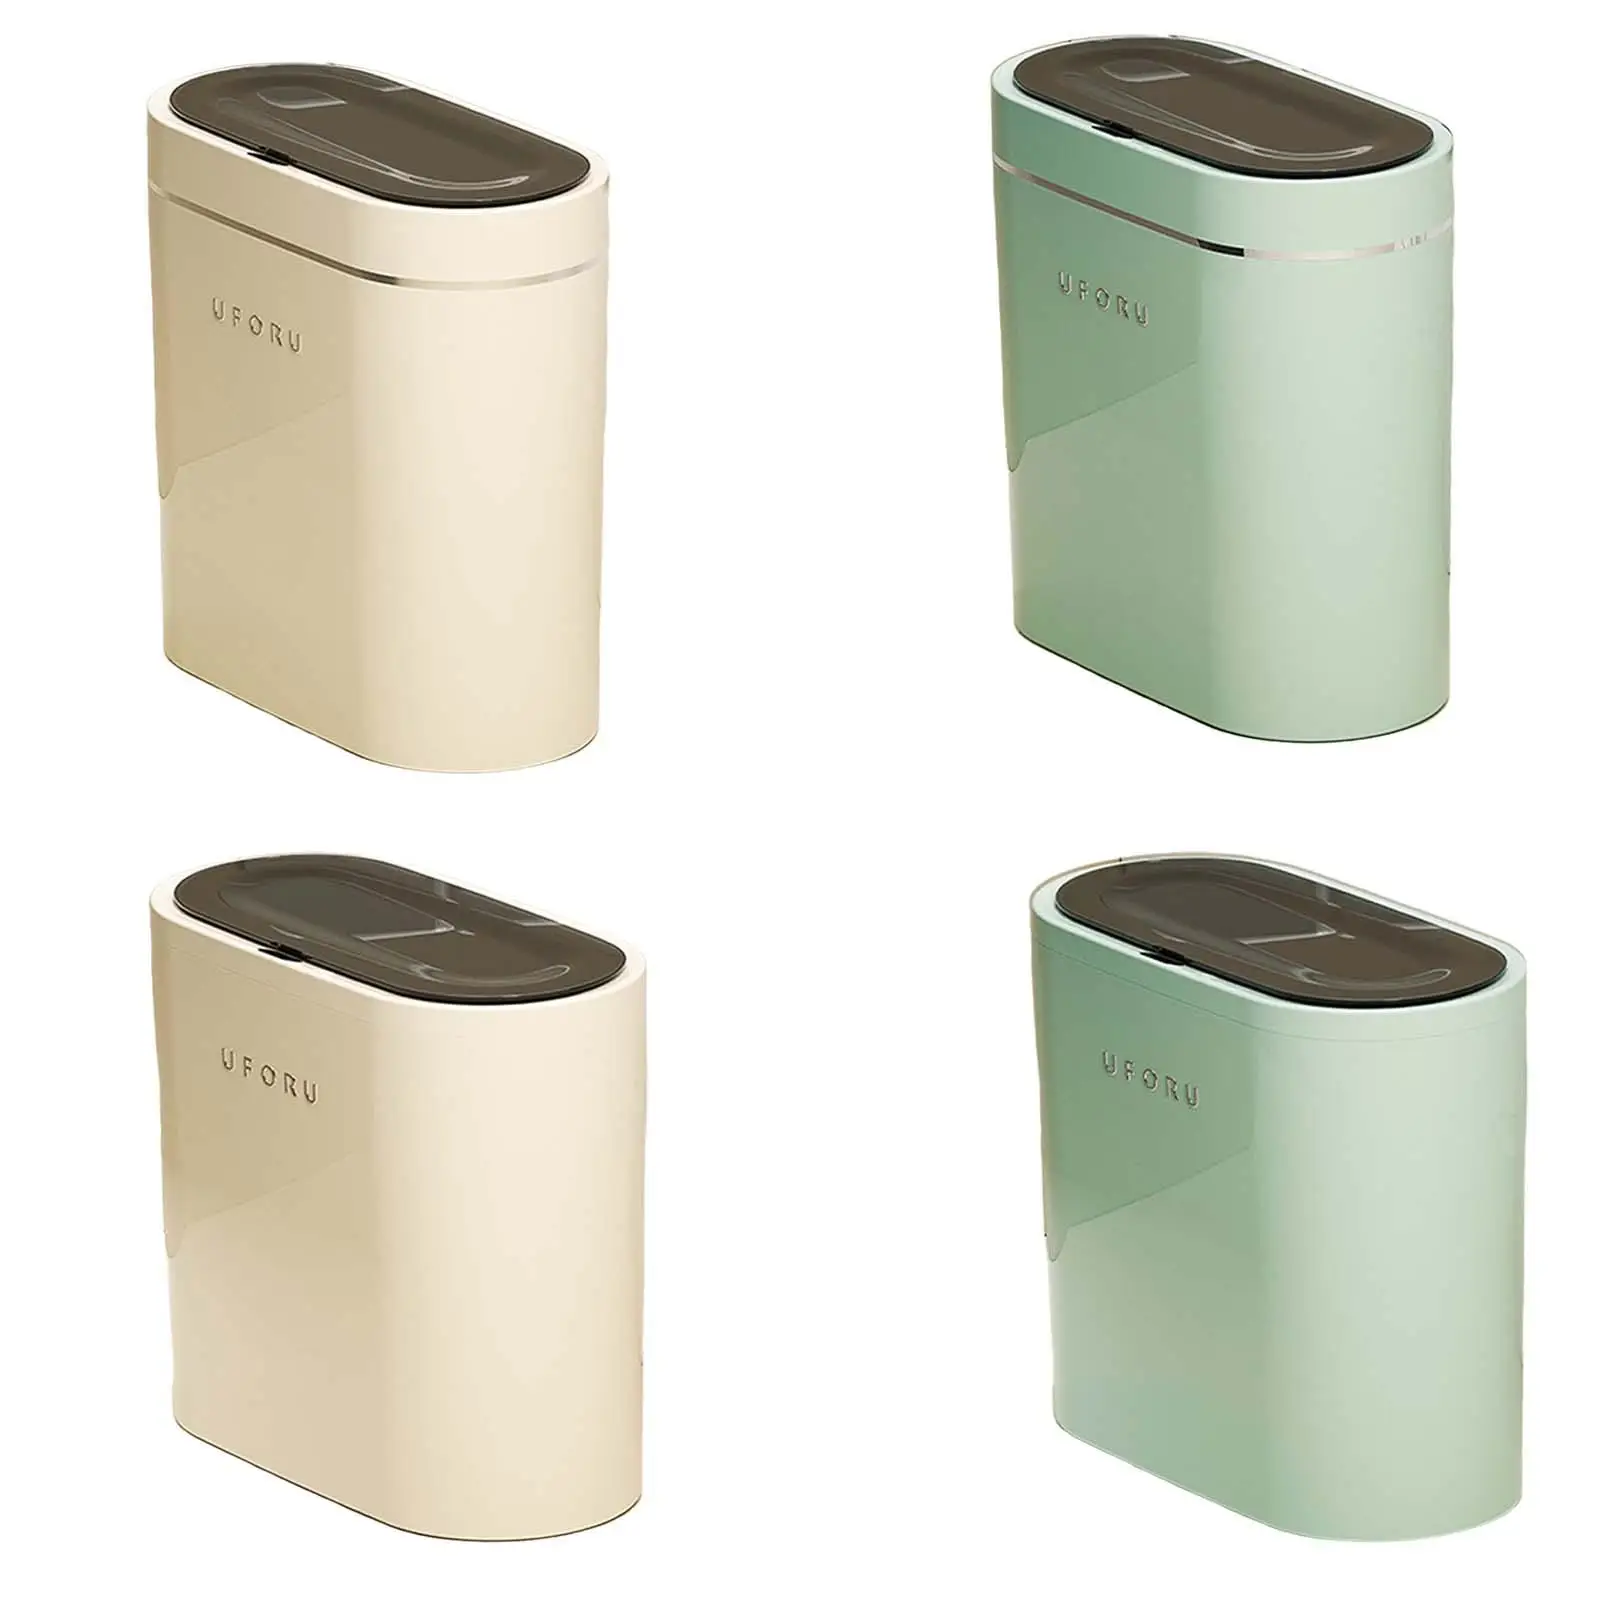 Intelligent Induction Trash Bins Space Saving Smart Trash Can Automatic Motion Sensor Garbage Can for Laundry Office Living Room